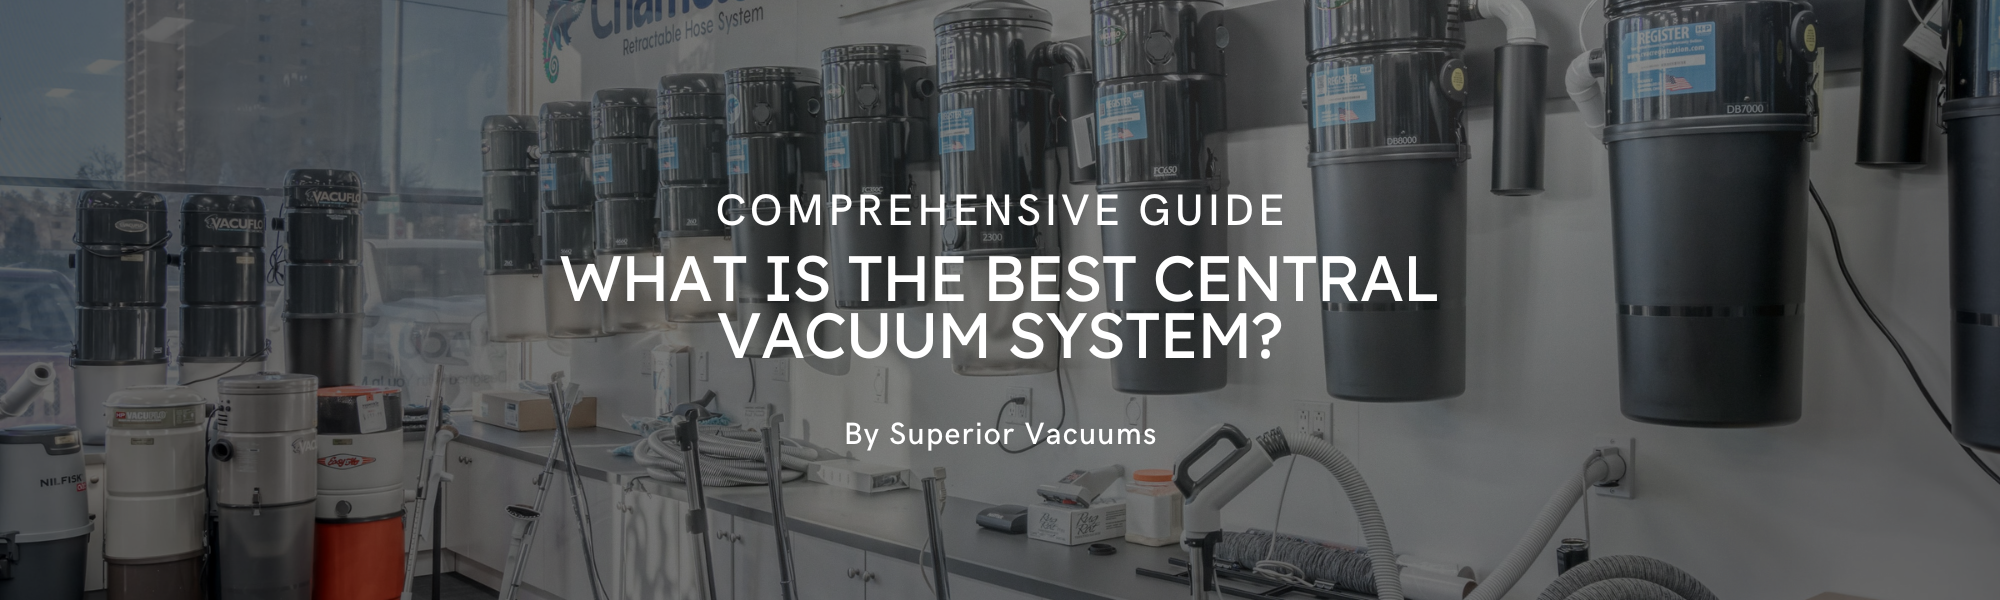 Best Central Vacuum System guide